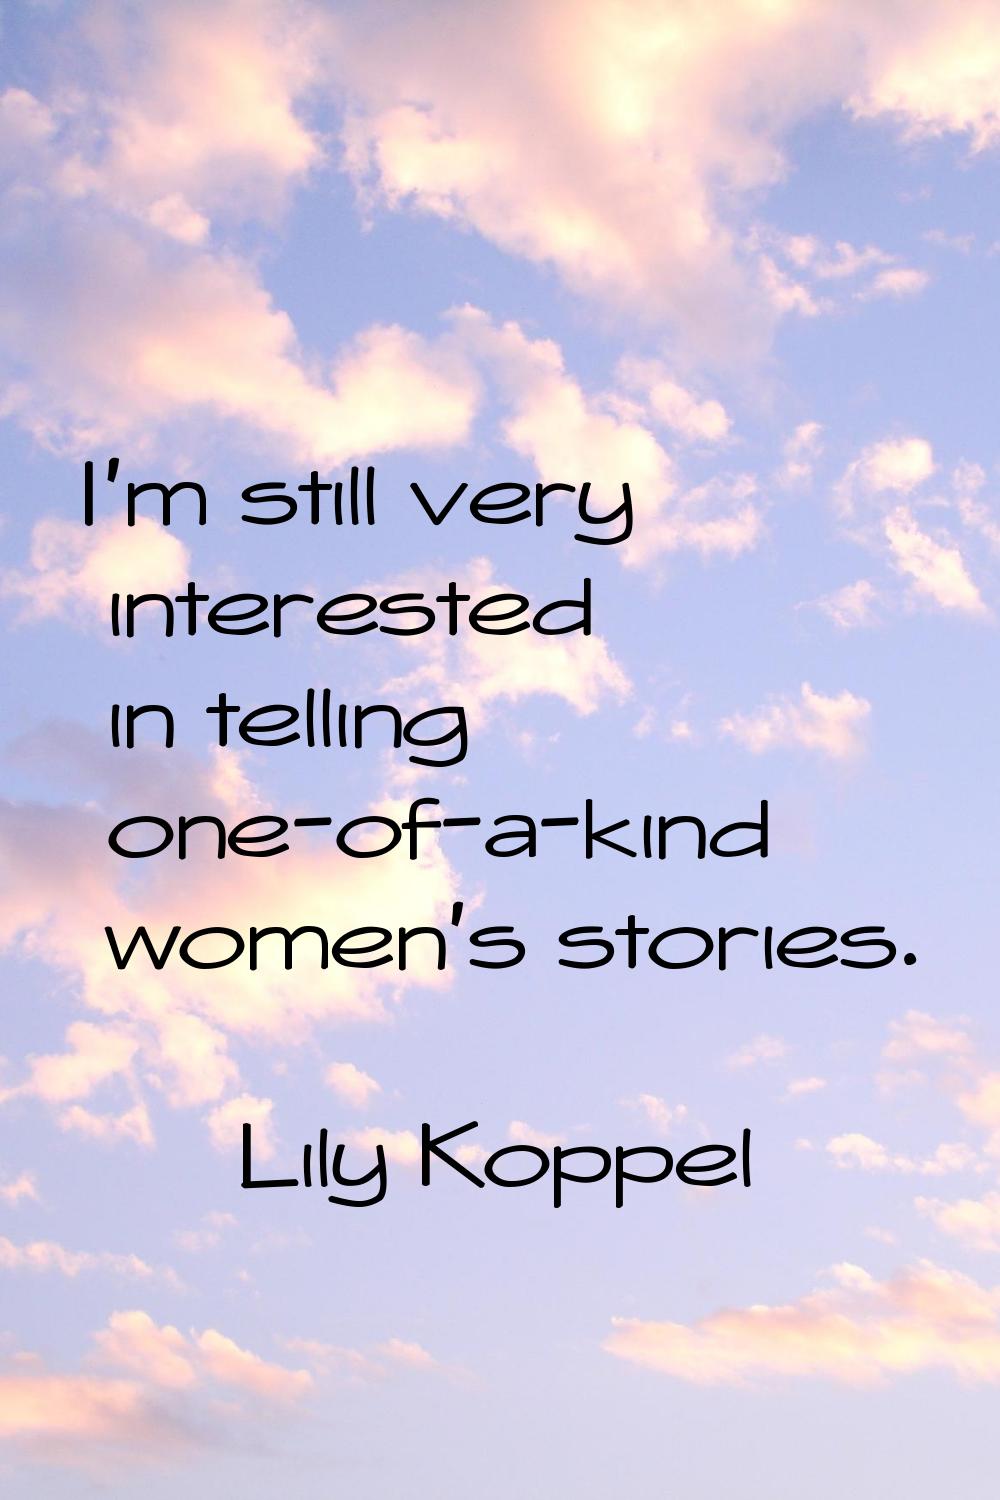 I'm still very interested in telling one-of-a-kind women's stories.